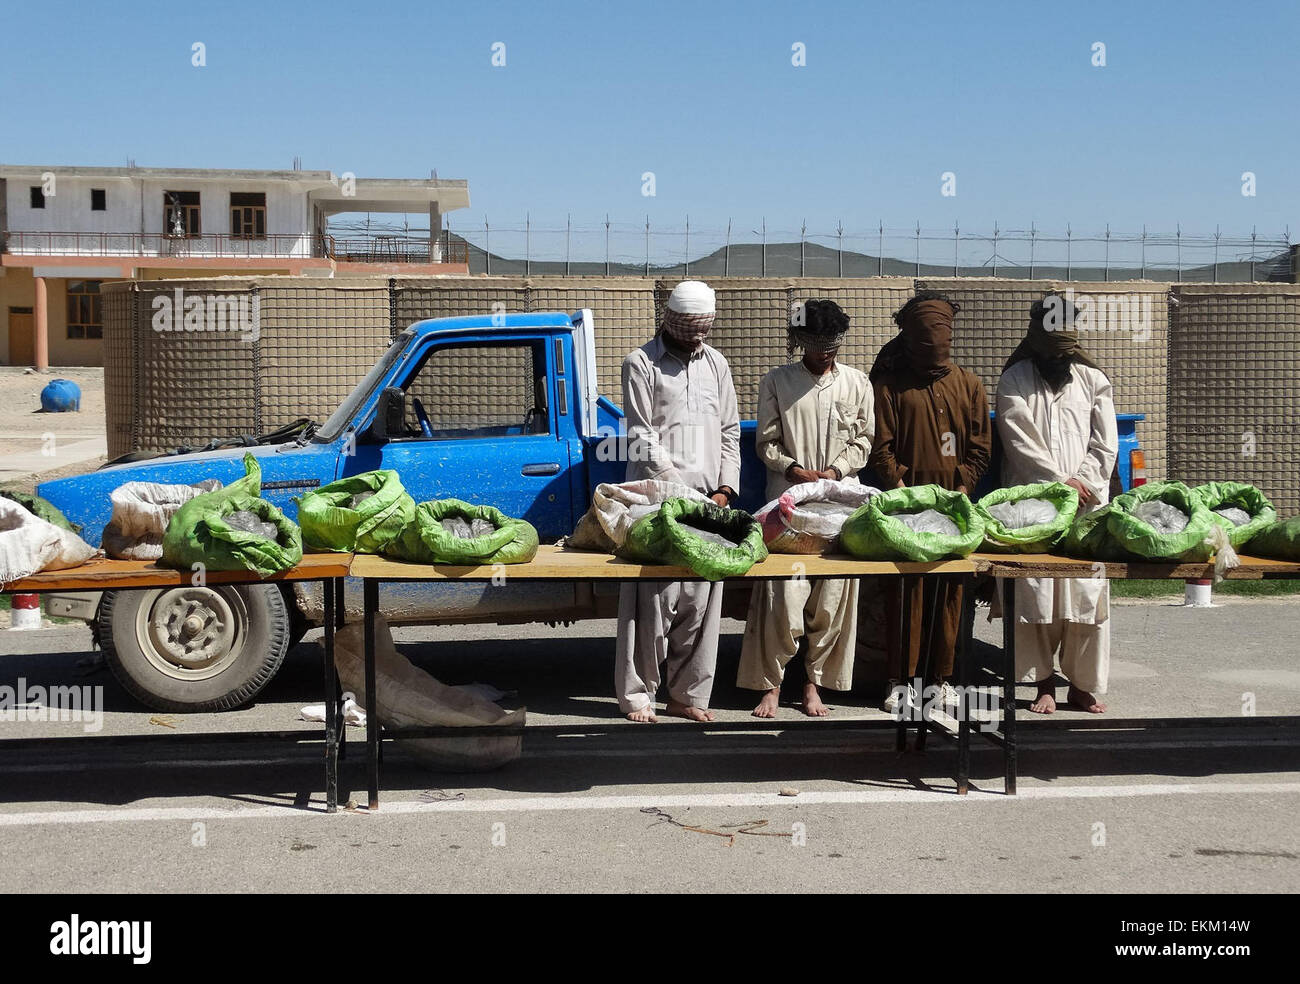 Helmand. 11th Apr, 2015. Taliban militants stand handcuffed after being captured with explosive devices by Afghan border police in Helmand province April 11, 2015. © Safdare/Xinhua/Alamy Live News Stock Photo